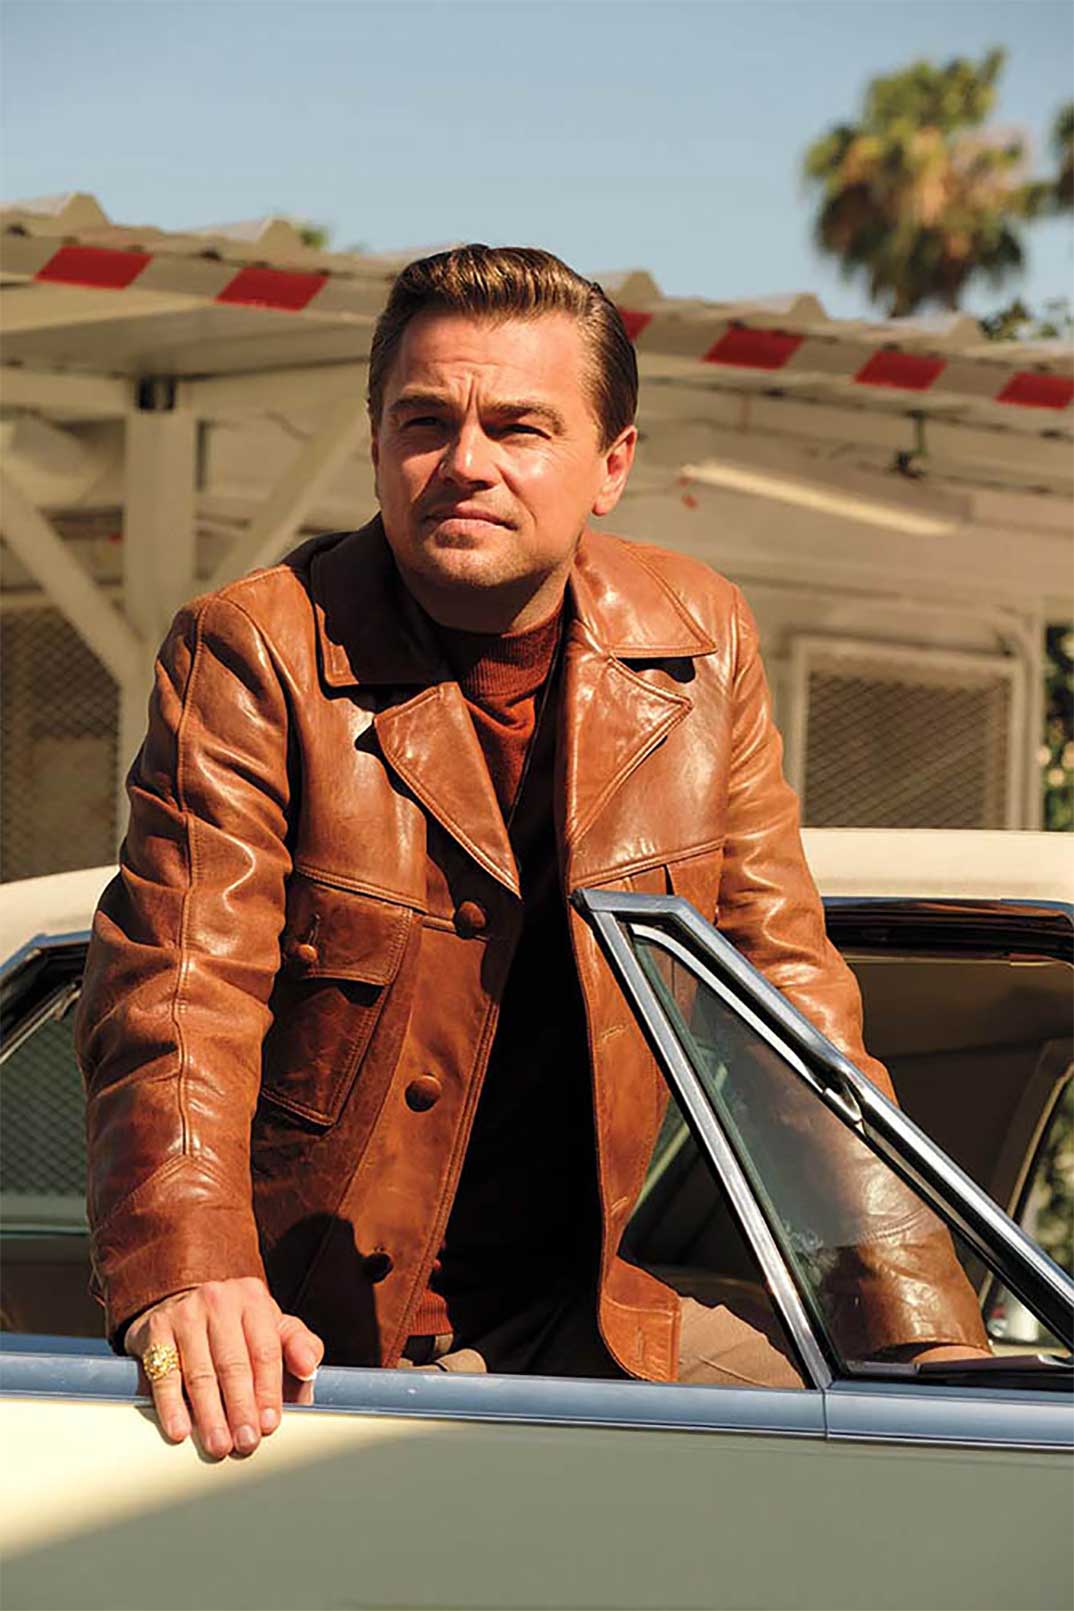 Leonardo DiCaprio - Once Upon a Time in Hollywood